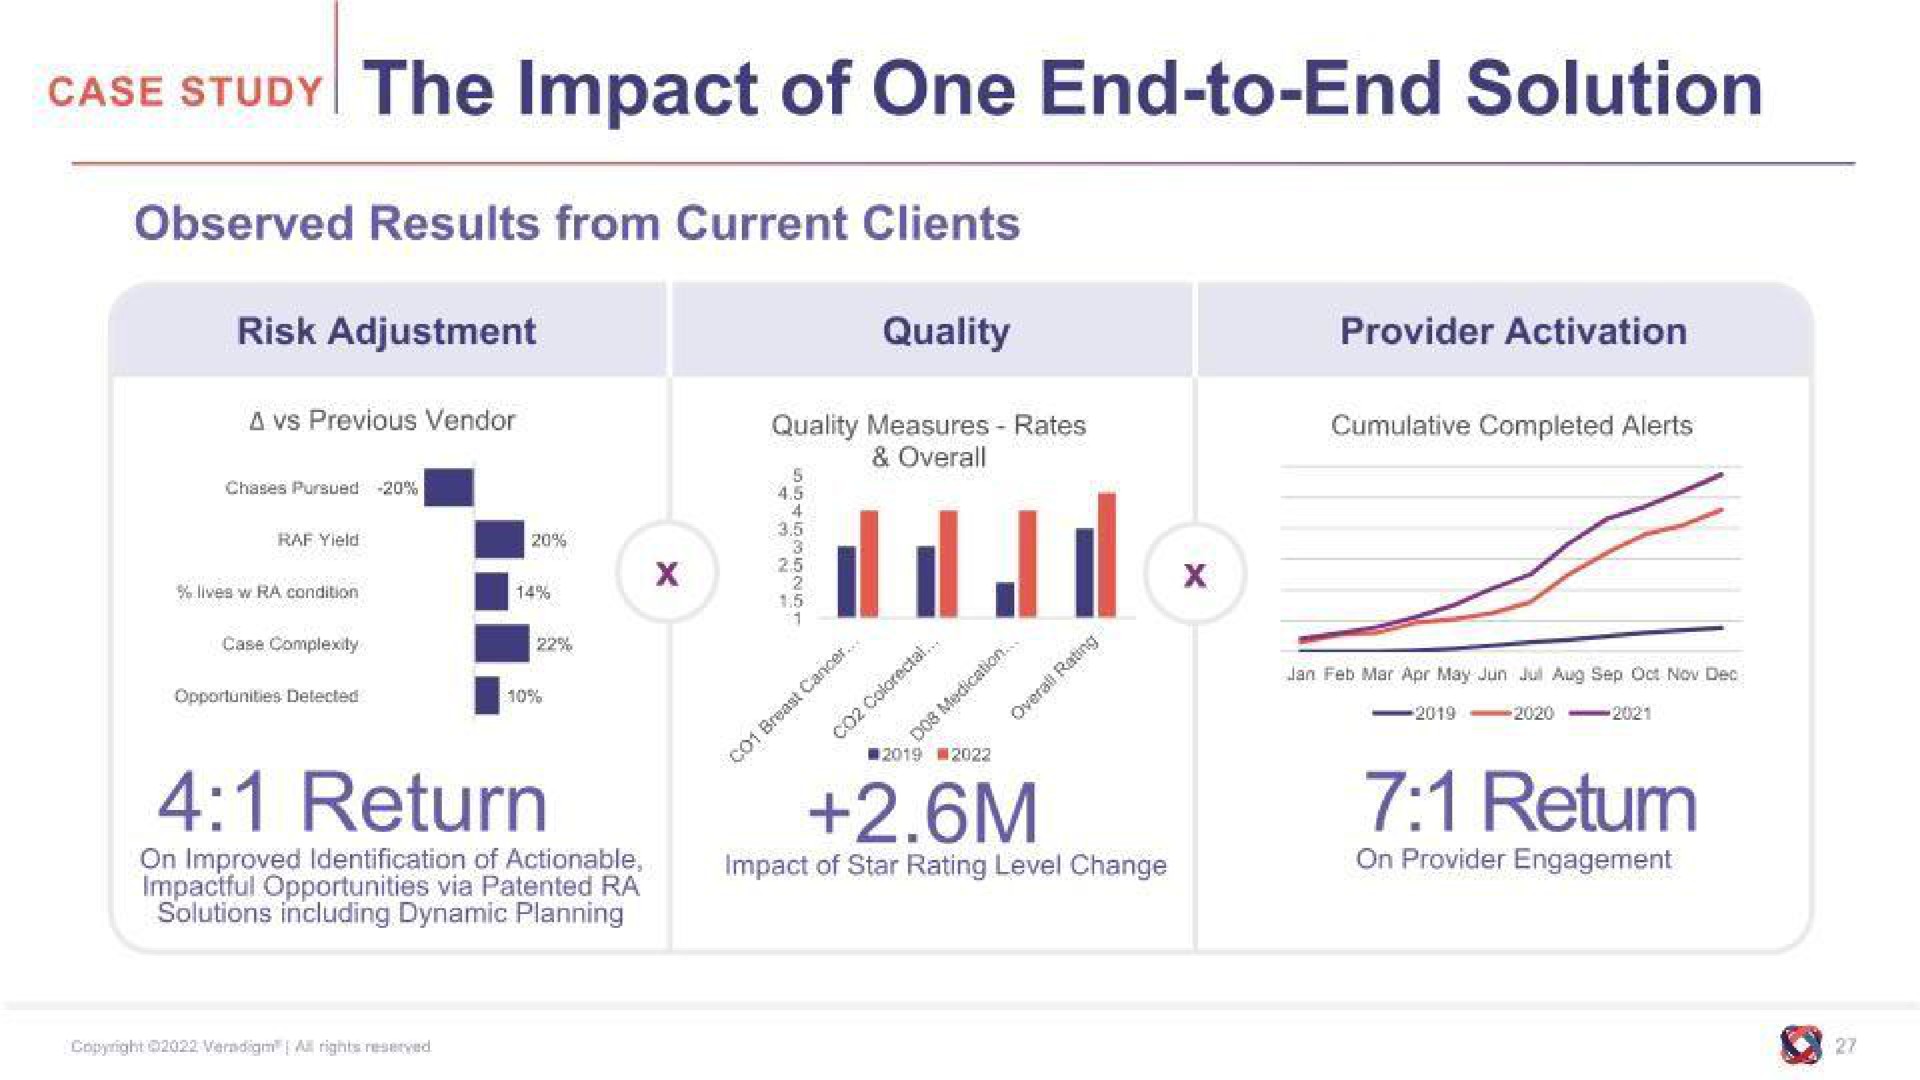 case the impact of one end to end solution return | Allscripts Healthcare Solutions